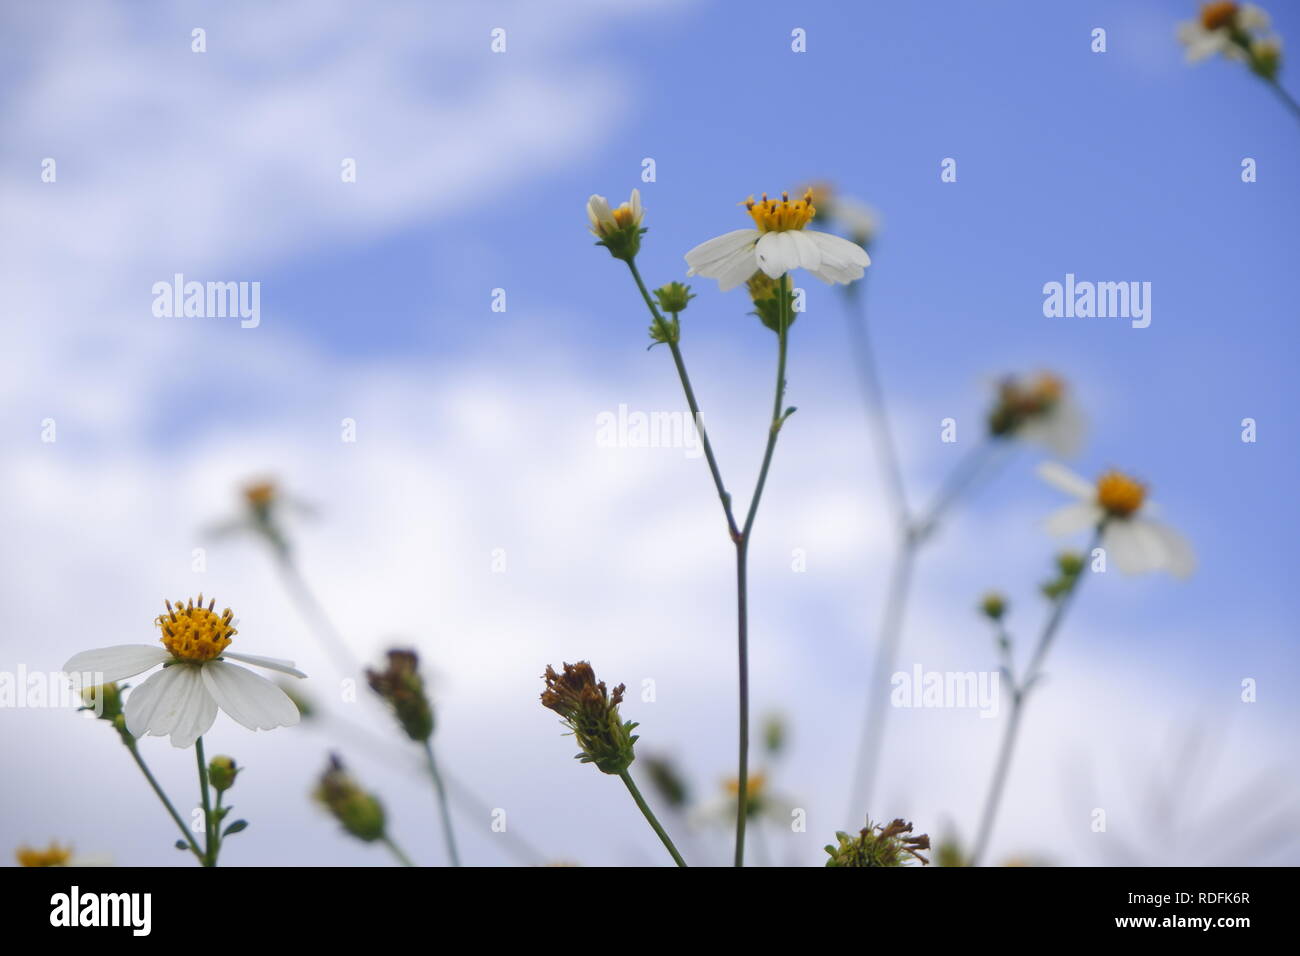 daisy white flower bloom in nature against blue sky background Stock Photo